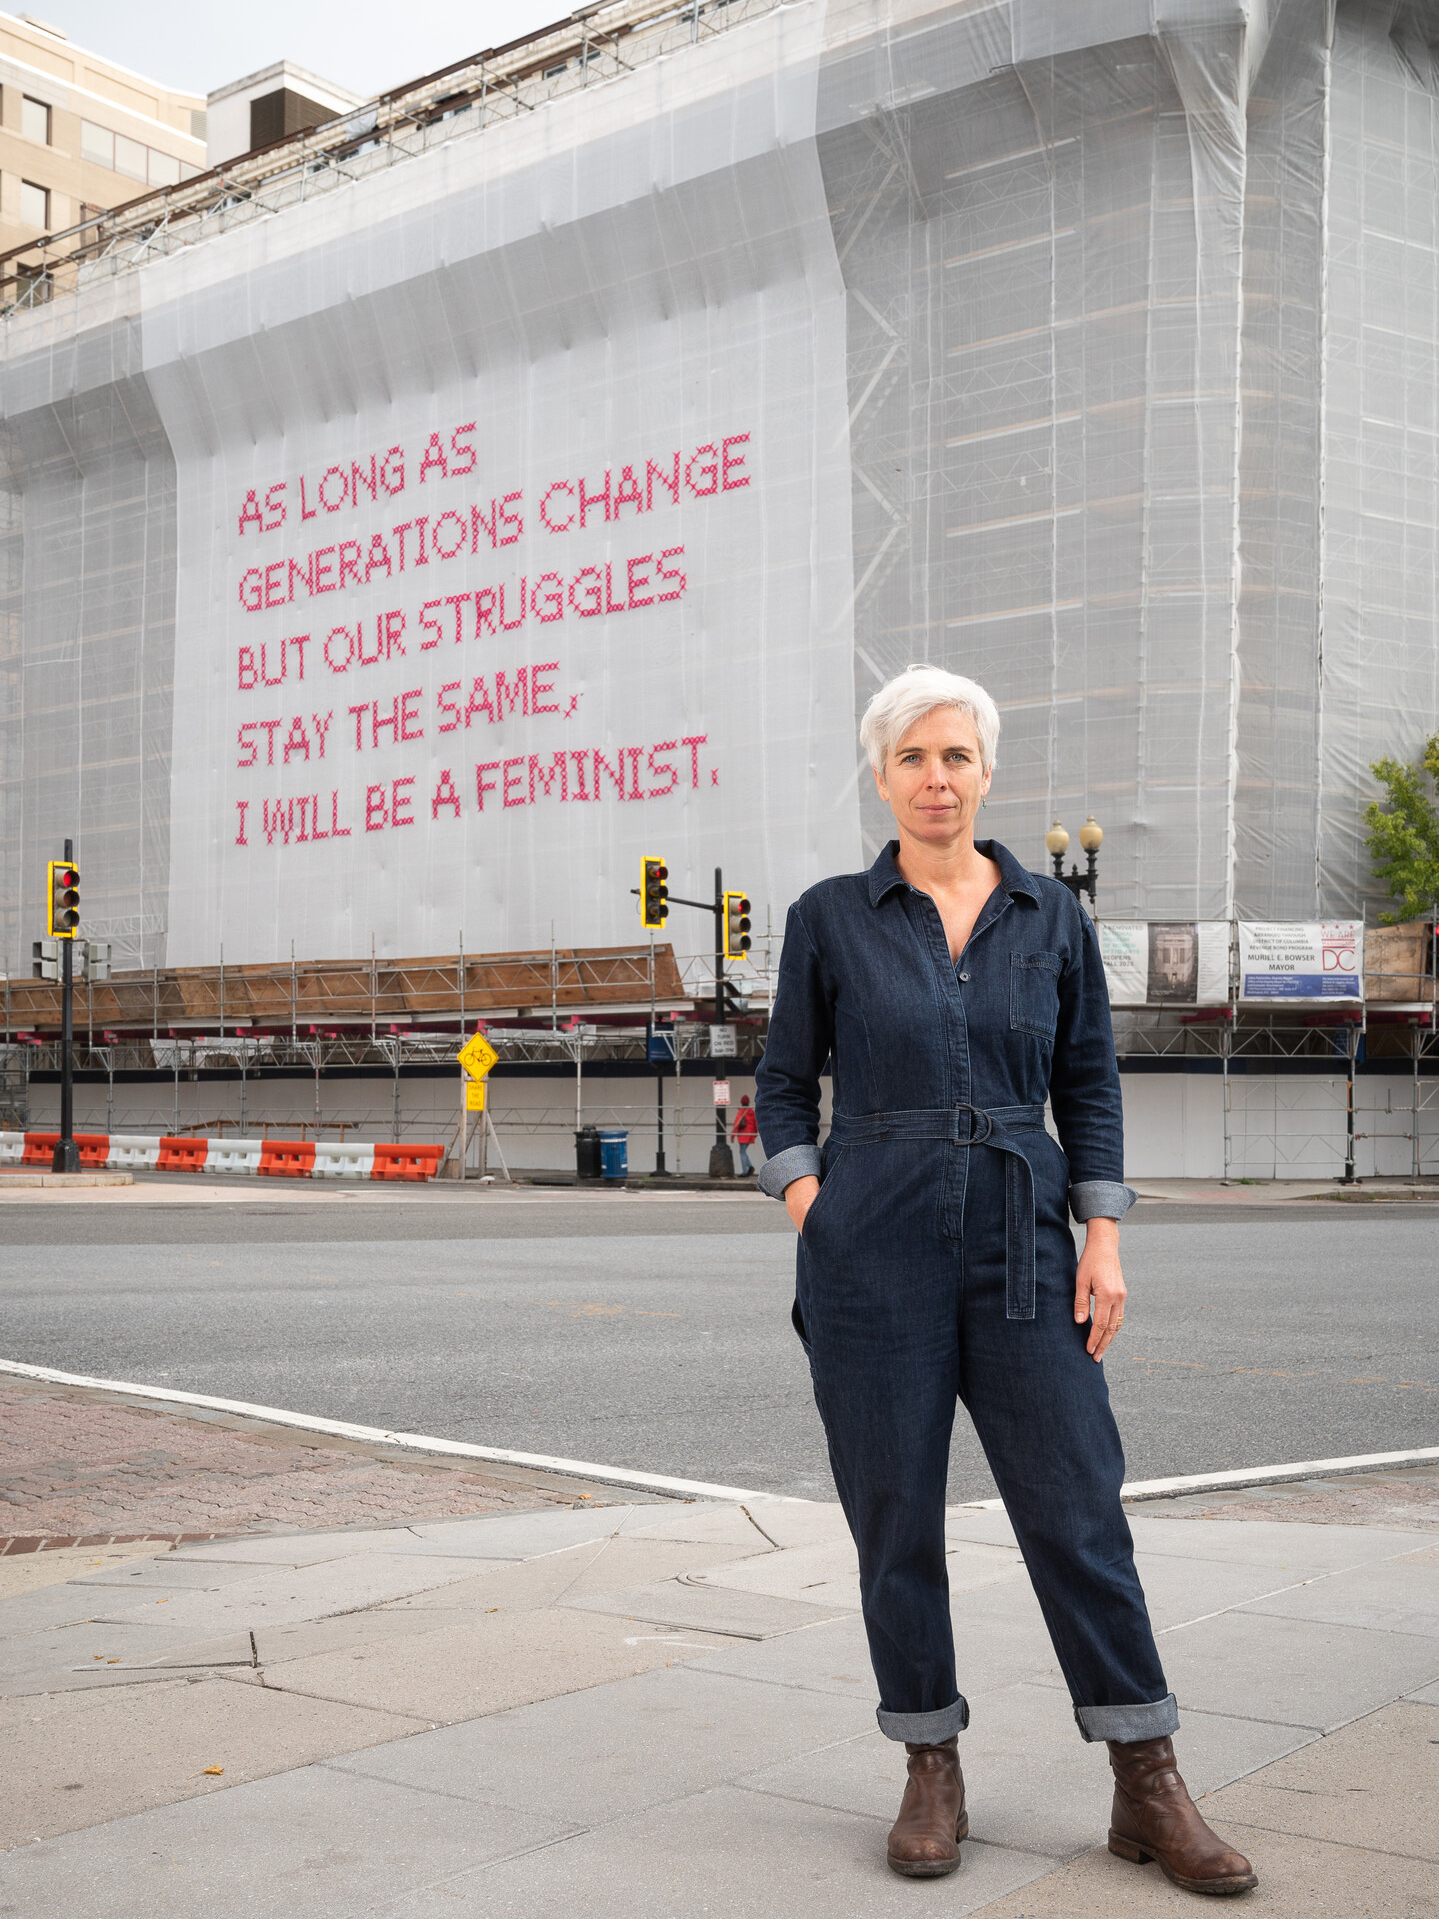 A light-skinned woman with short white hair stands in front of a building whose façade is covered in a white mesh artwork with bright pink cross-stitched letters that say "As long as generations change but our struggles stay the same, I will be a femini